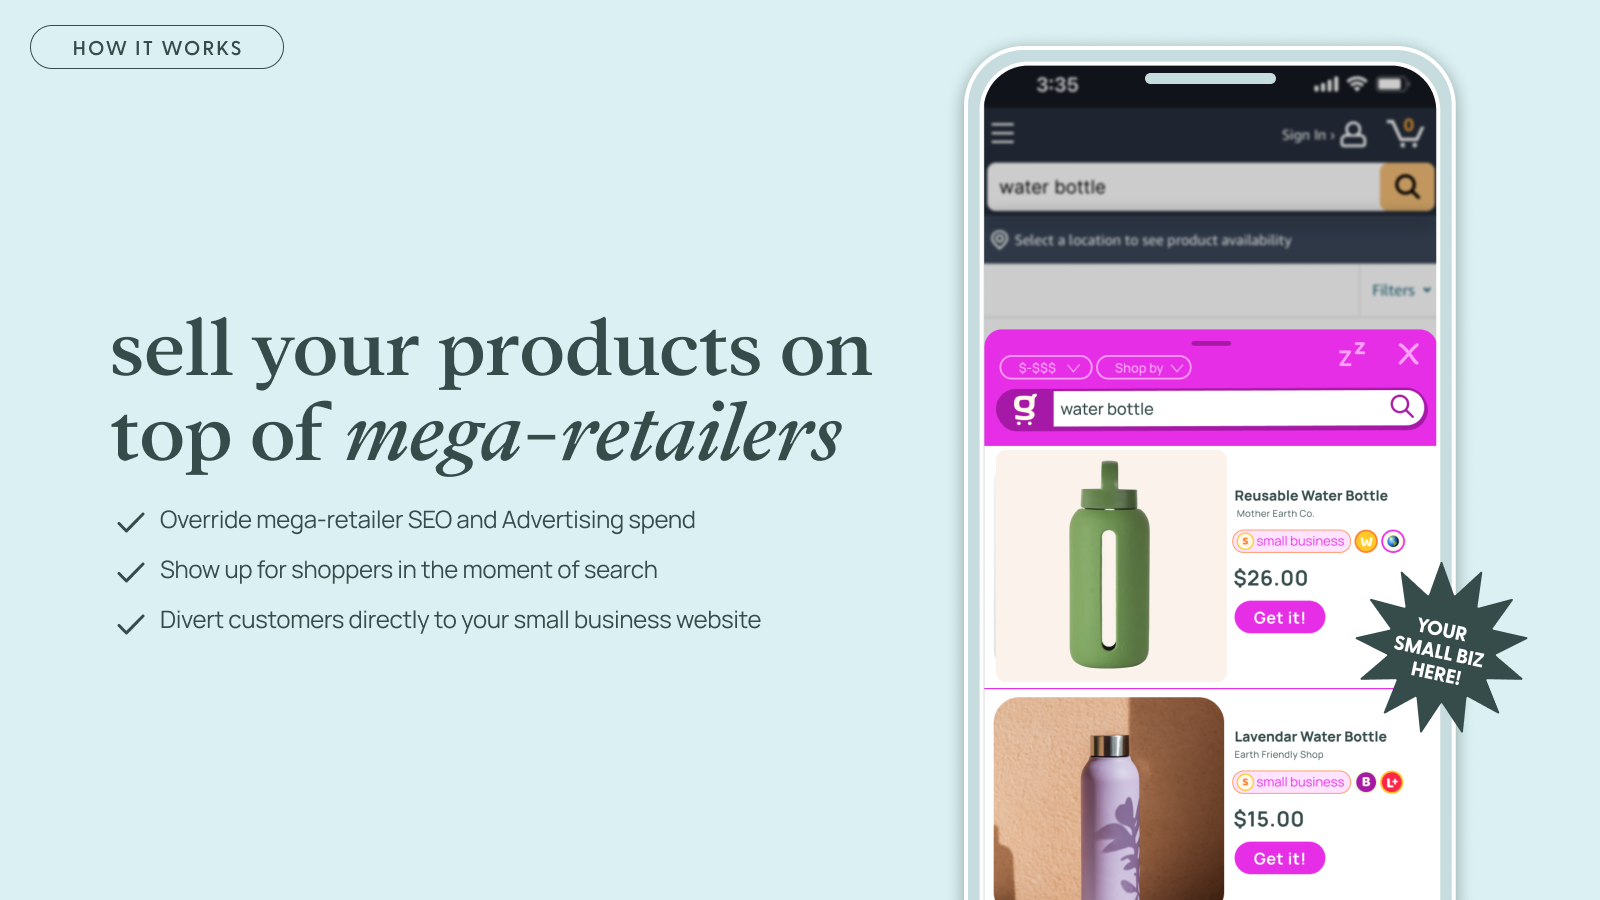 sell your products on top of mega-retailers